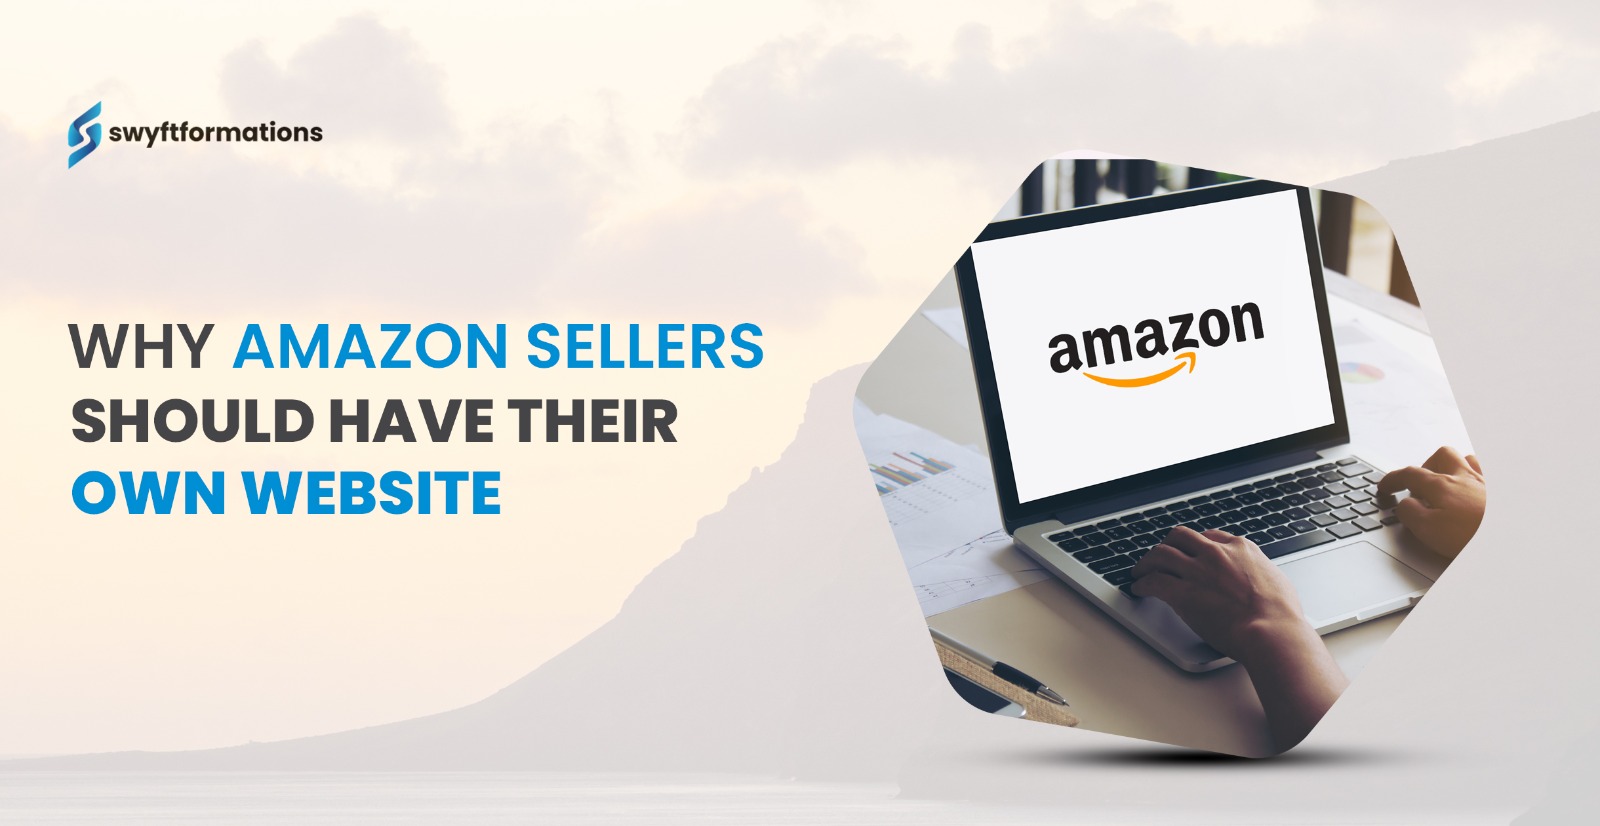 Why Amazon sellers should have their website